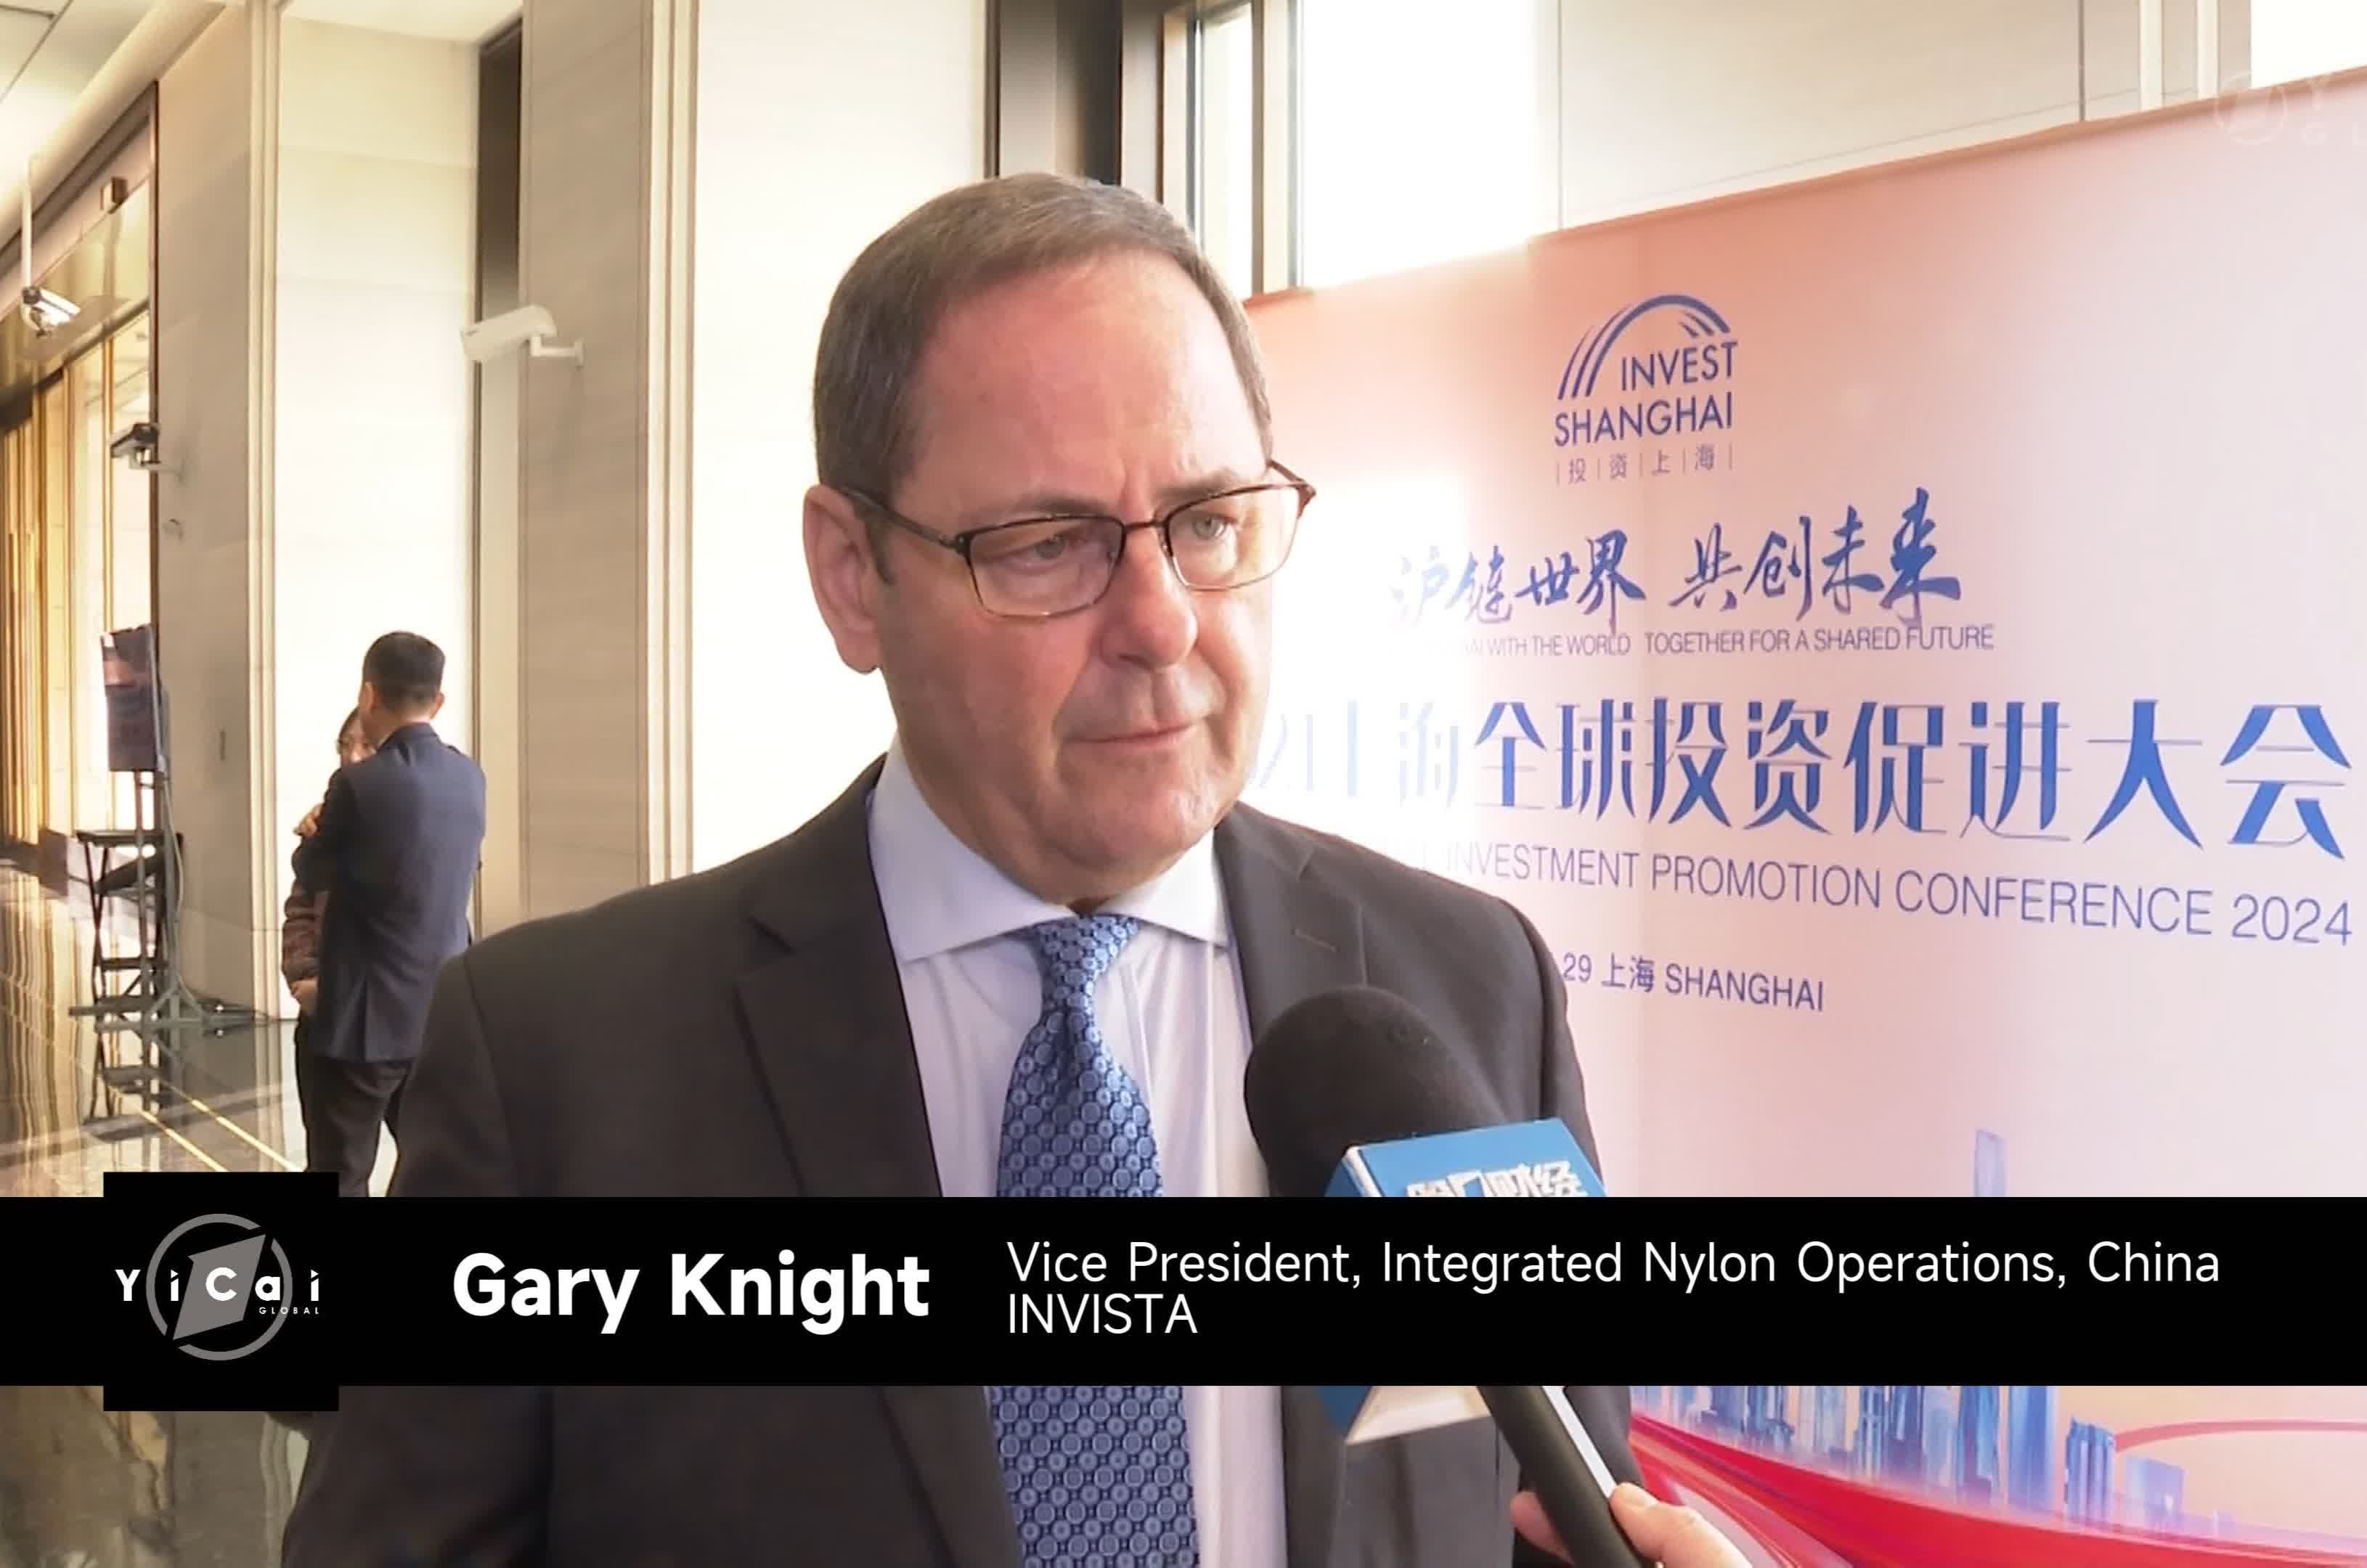 Shanghai Has Become Easier to Invest in, Invista Exec Says